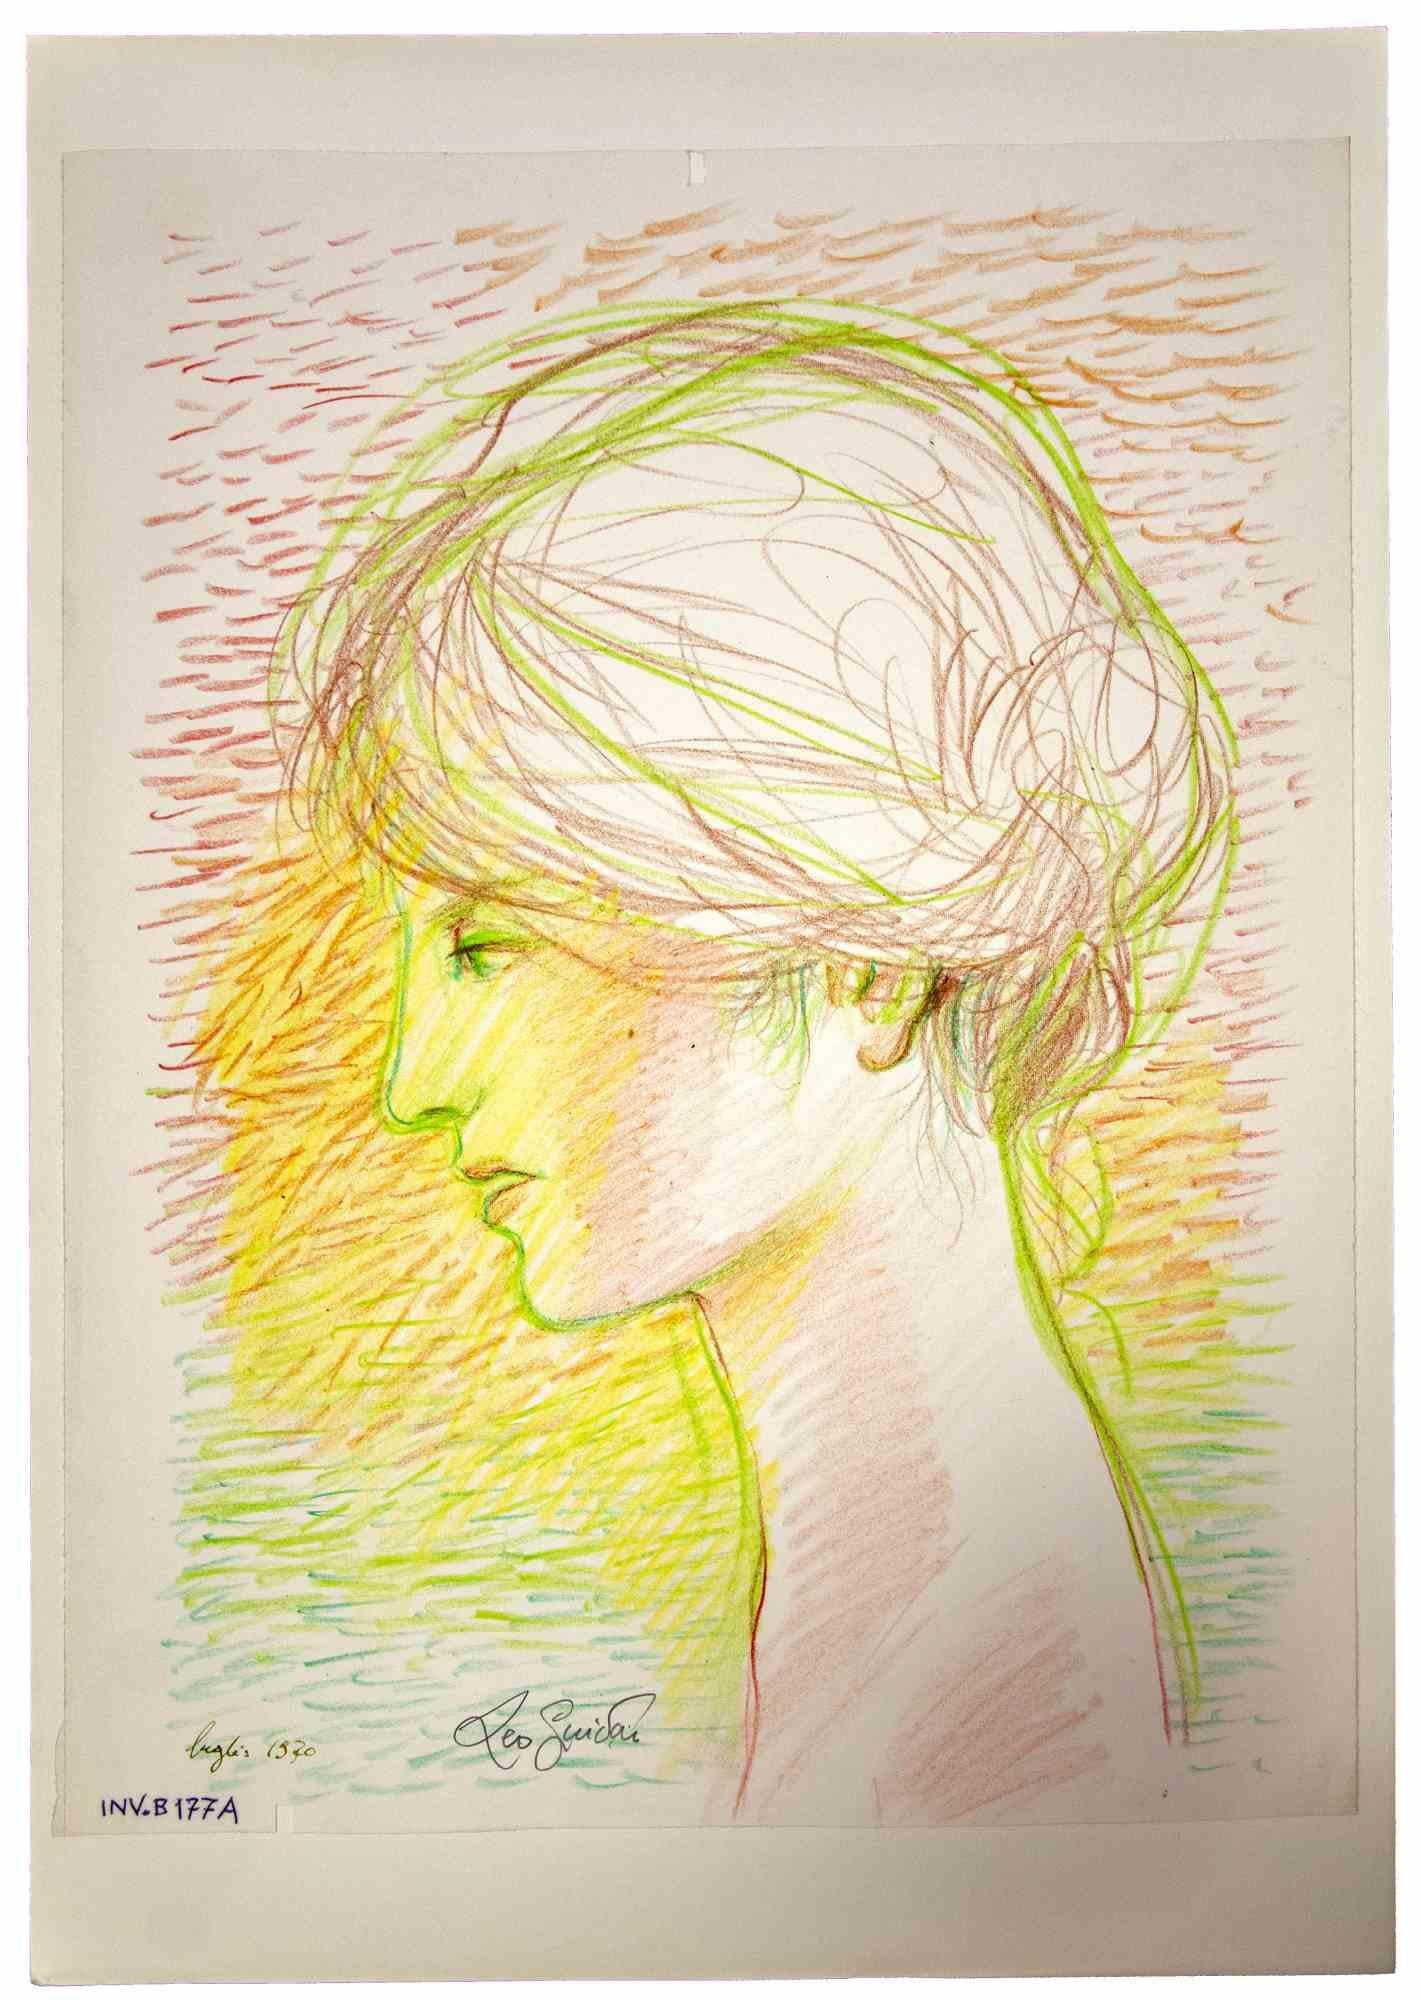 Portraits is an original Contemporary artwork realized  in 1970  by the italian Contemporary artist  Leo Guida  (1992 - 2017).

Original drawing in pastel and watercolor on ivory-colored paper, glued on cardboard (50 x 35 cm)
 
Hand-signed and dated